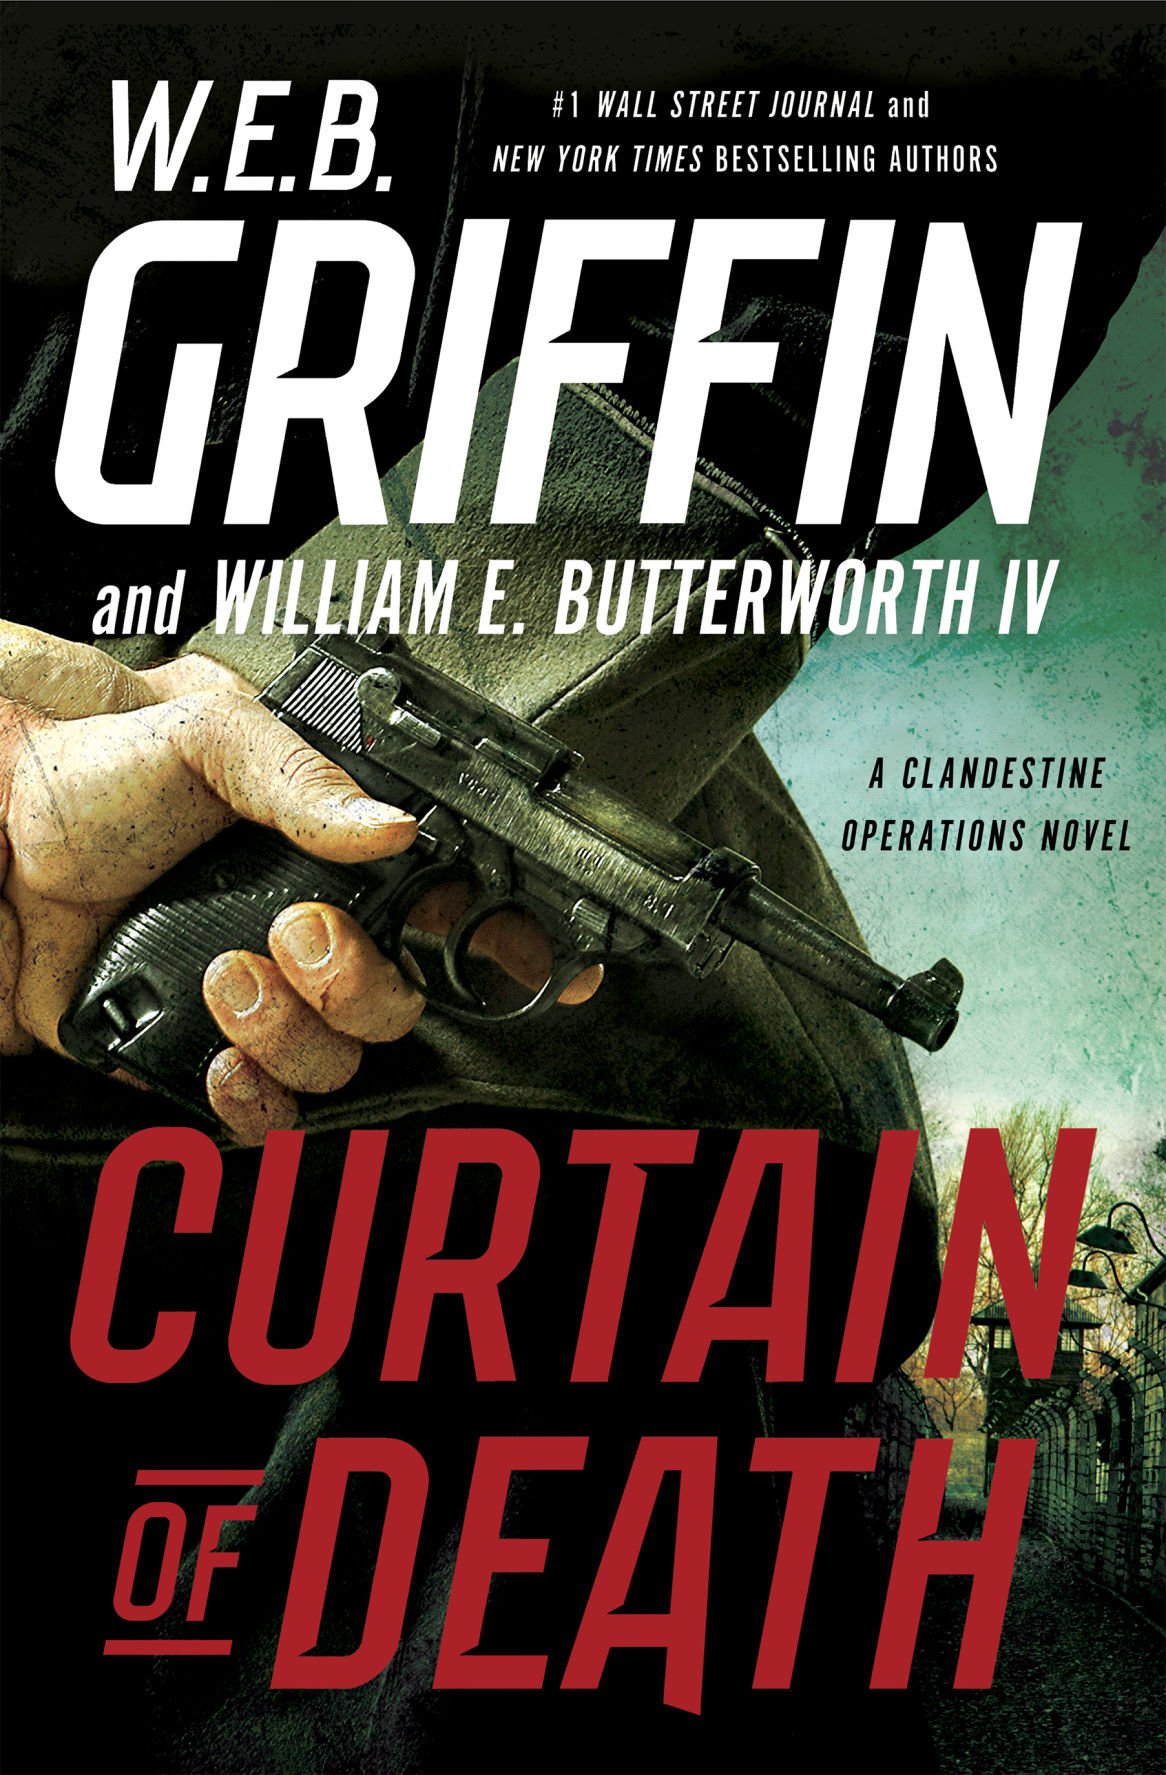 Review 'Broken Trust' and 'Curtain of Death' by W.E.B. Griffin Book